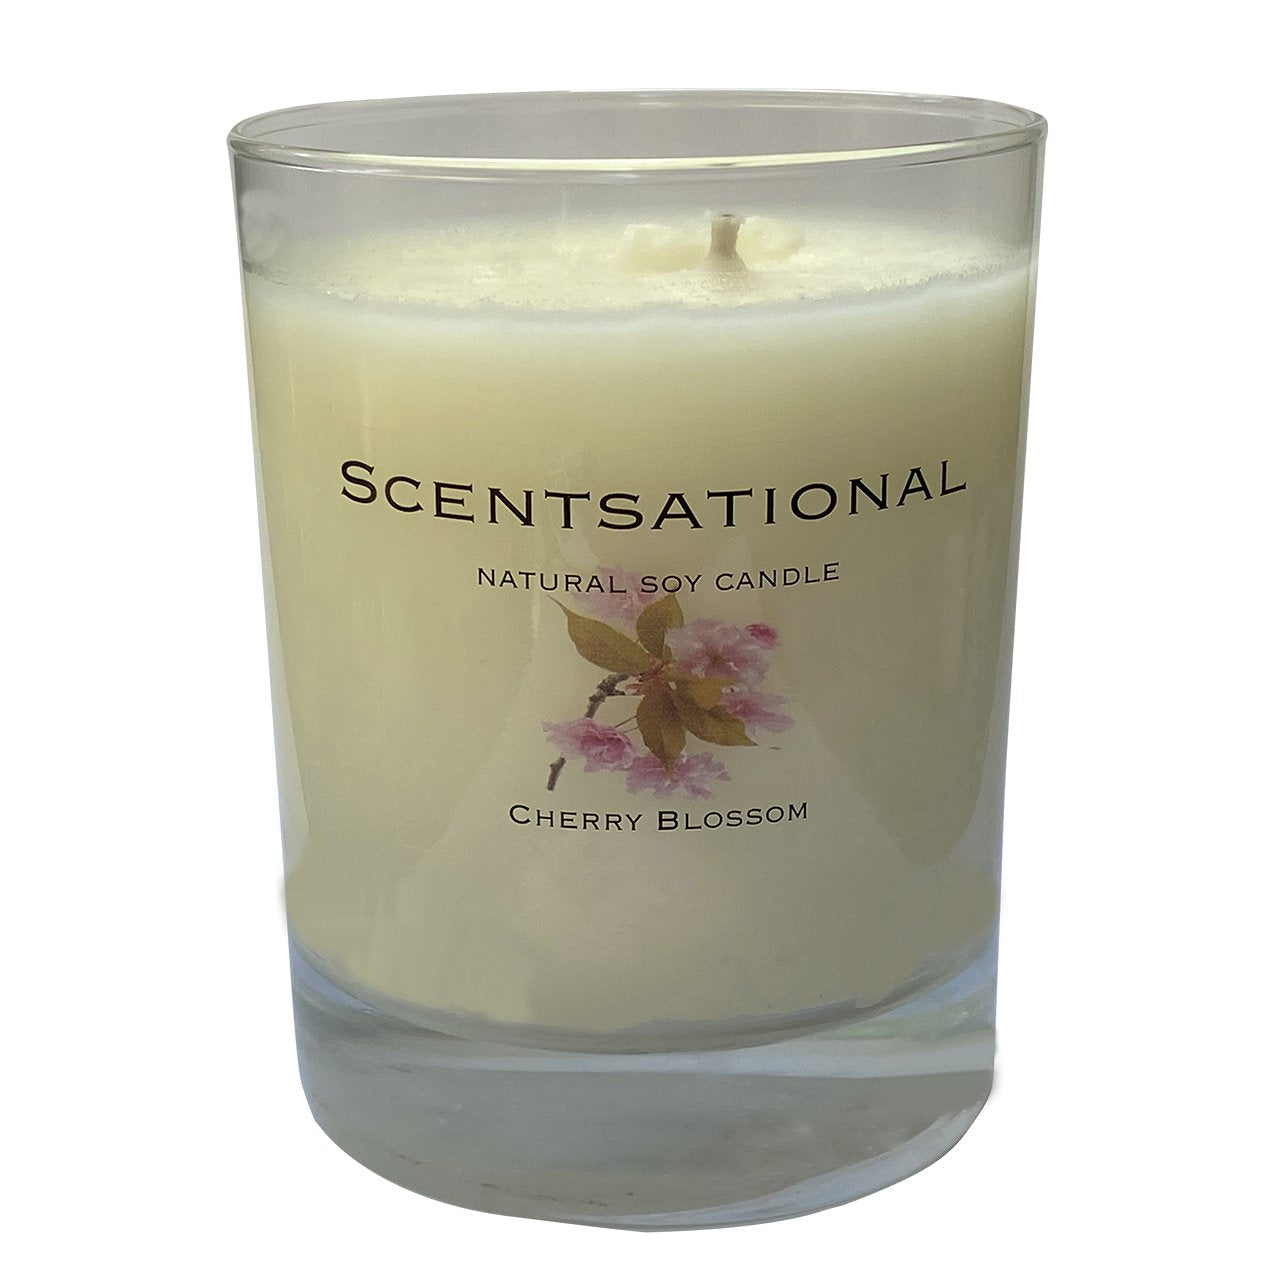 Scented Soy Candles CHERRY BLOSSOM (11 oz) eliminates smoke, household and pet odors.